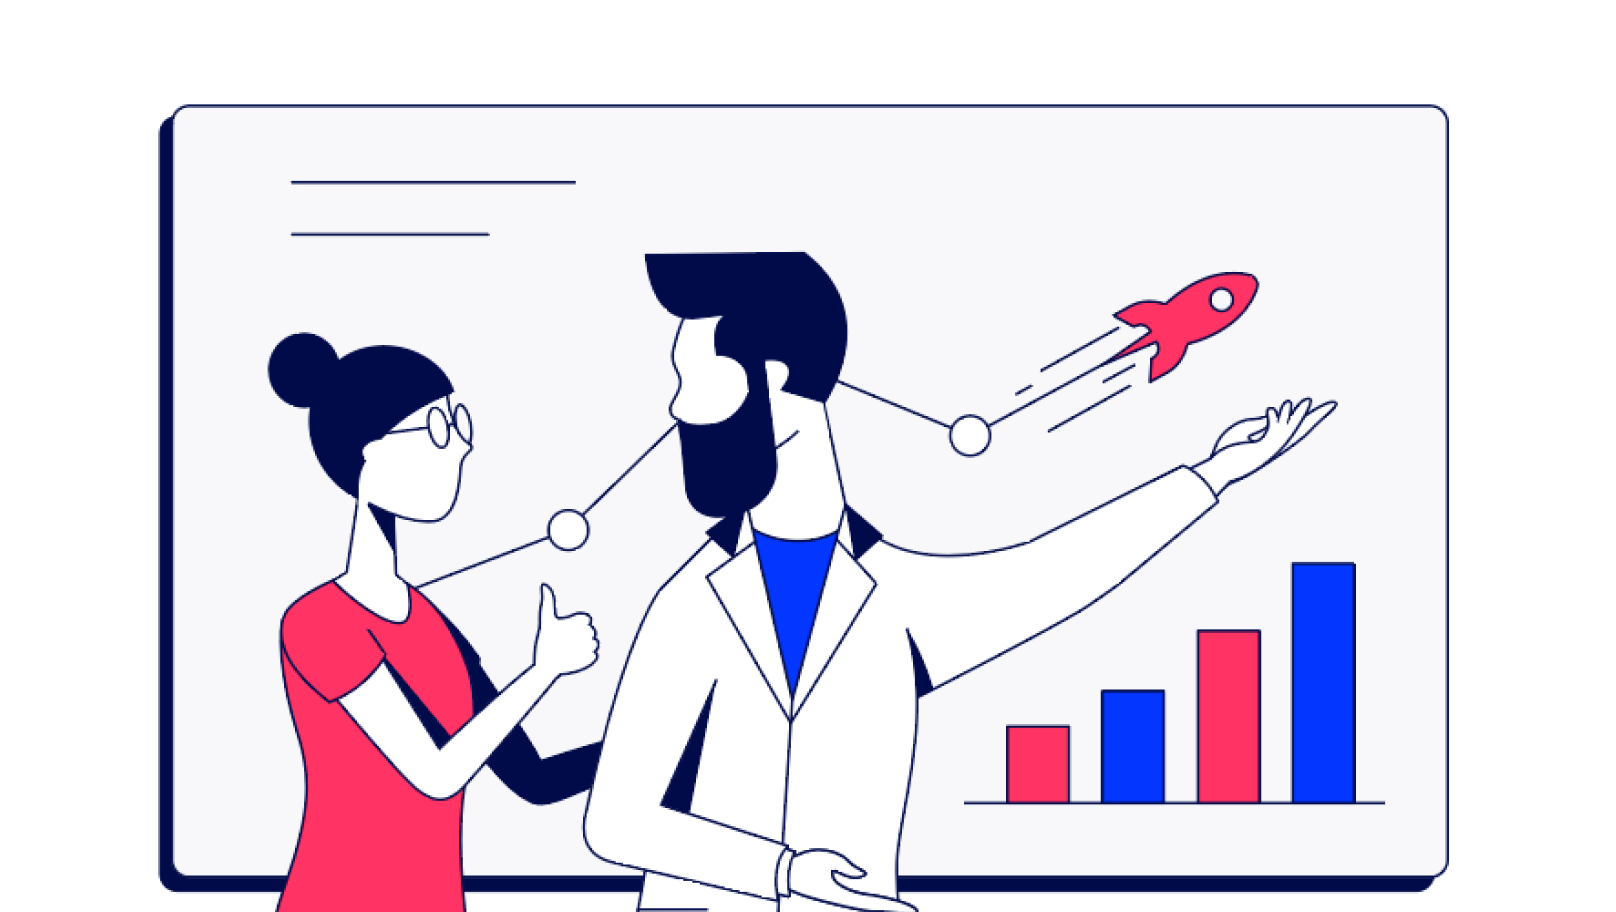 Abstract visual of woman giving a man a thumbs up with charts showing upward trends